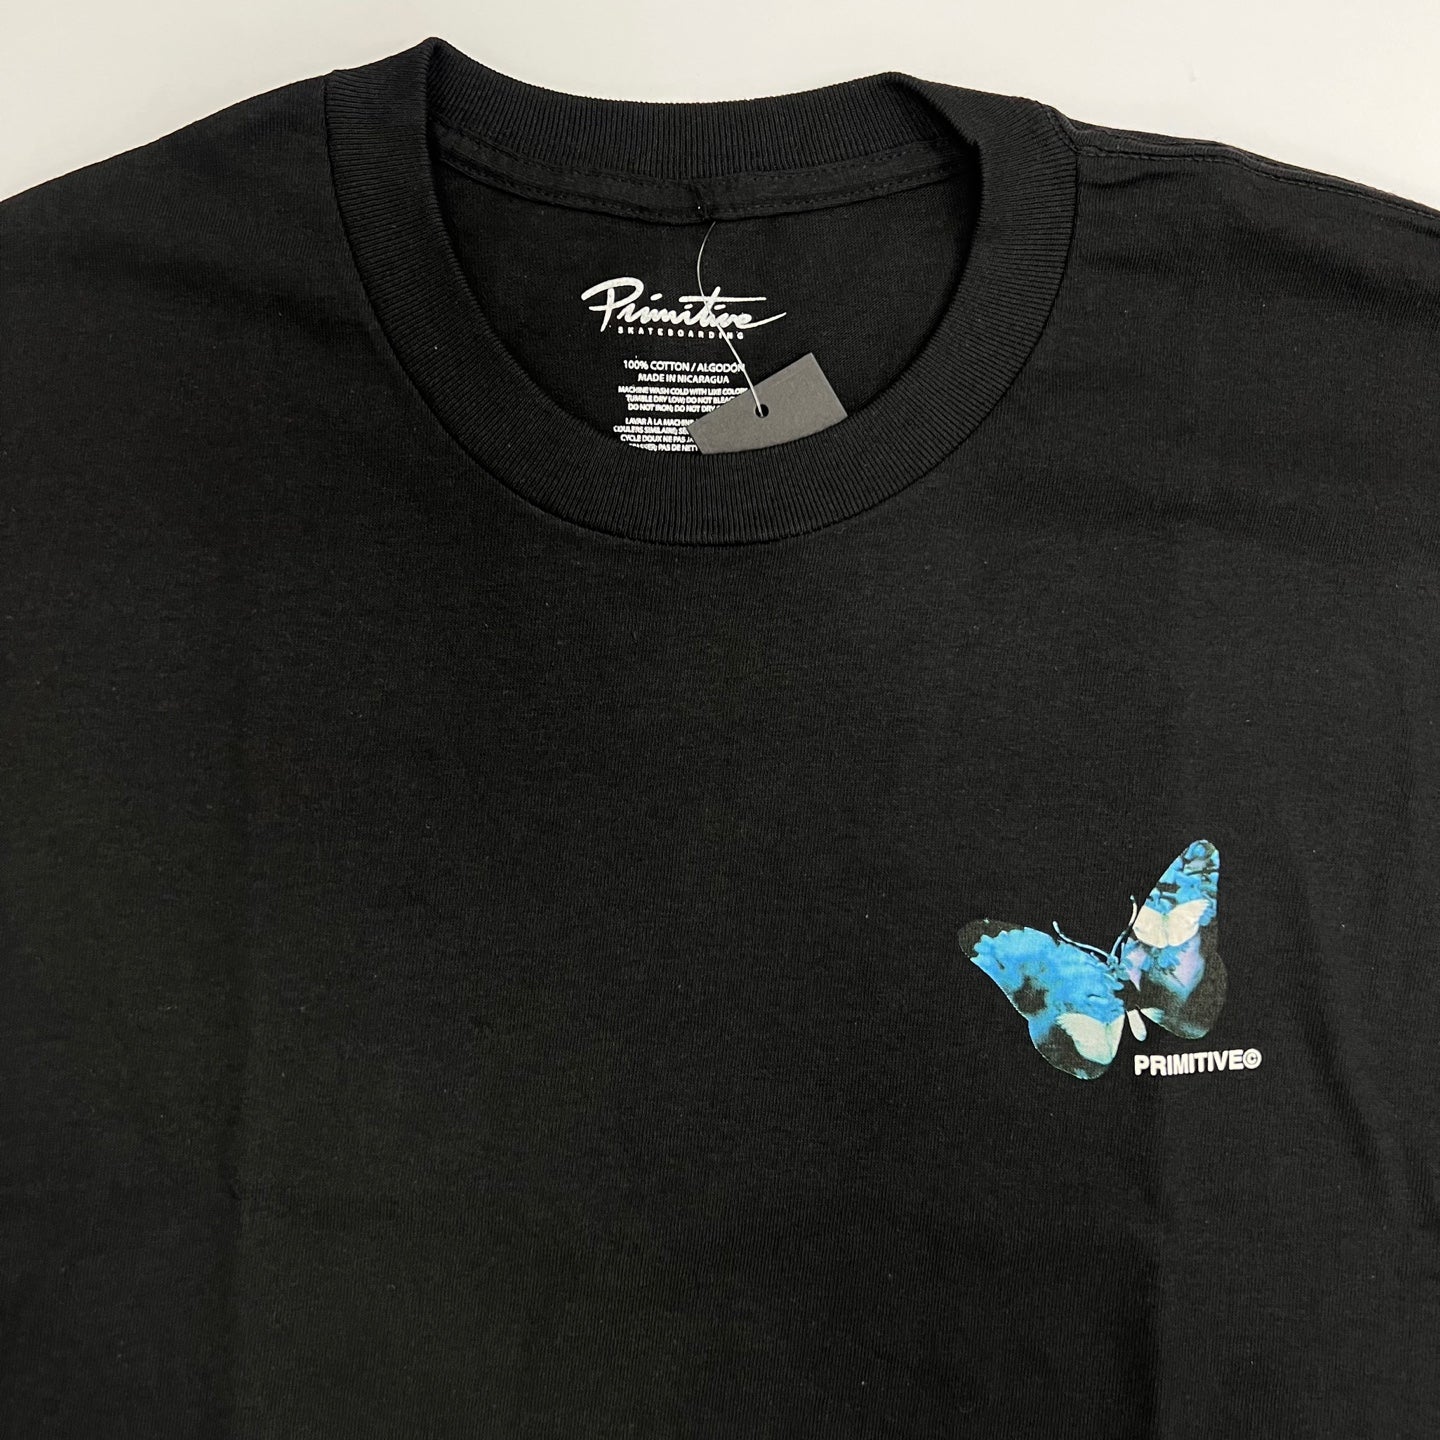 Primitive Good Life Butterfly Graphic T-Shirt